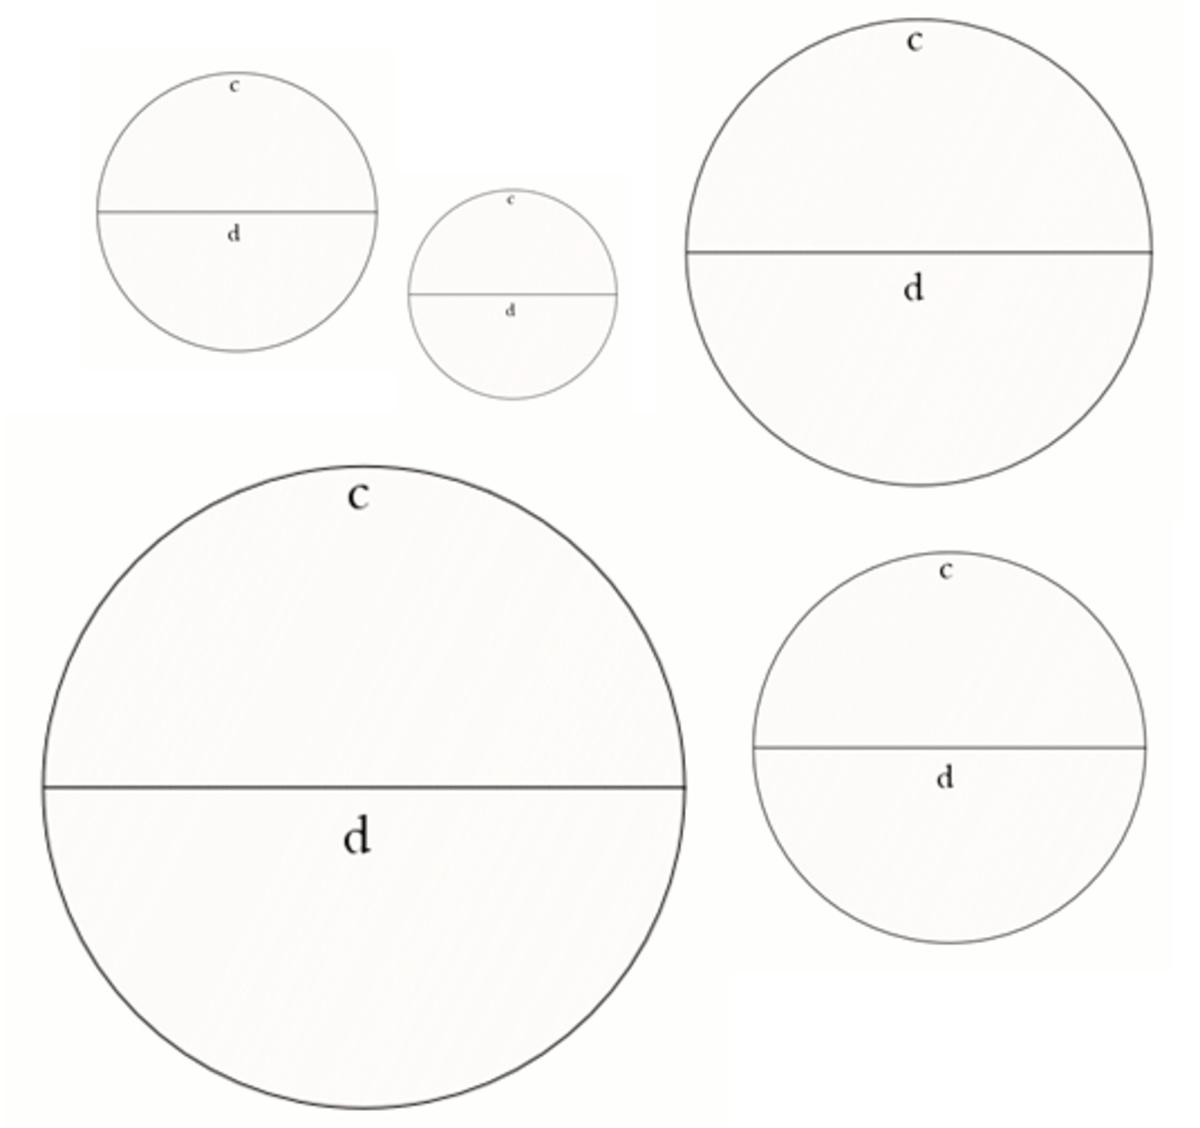 Teaching Circumference and Diameter of a Circle - Lesson Ideas